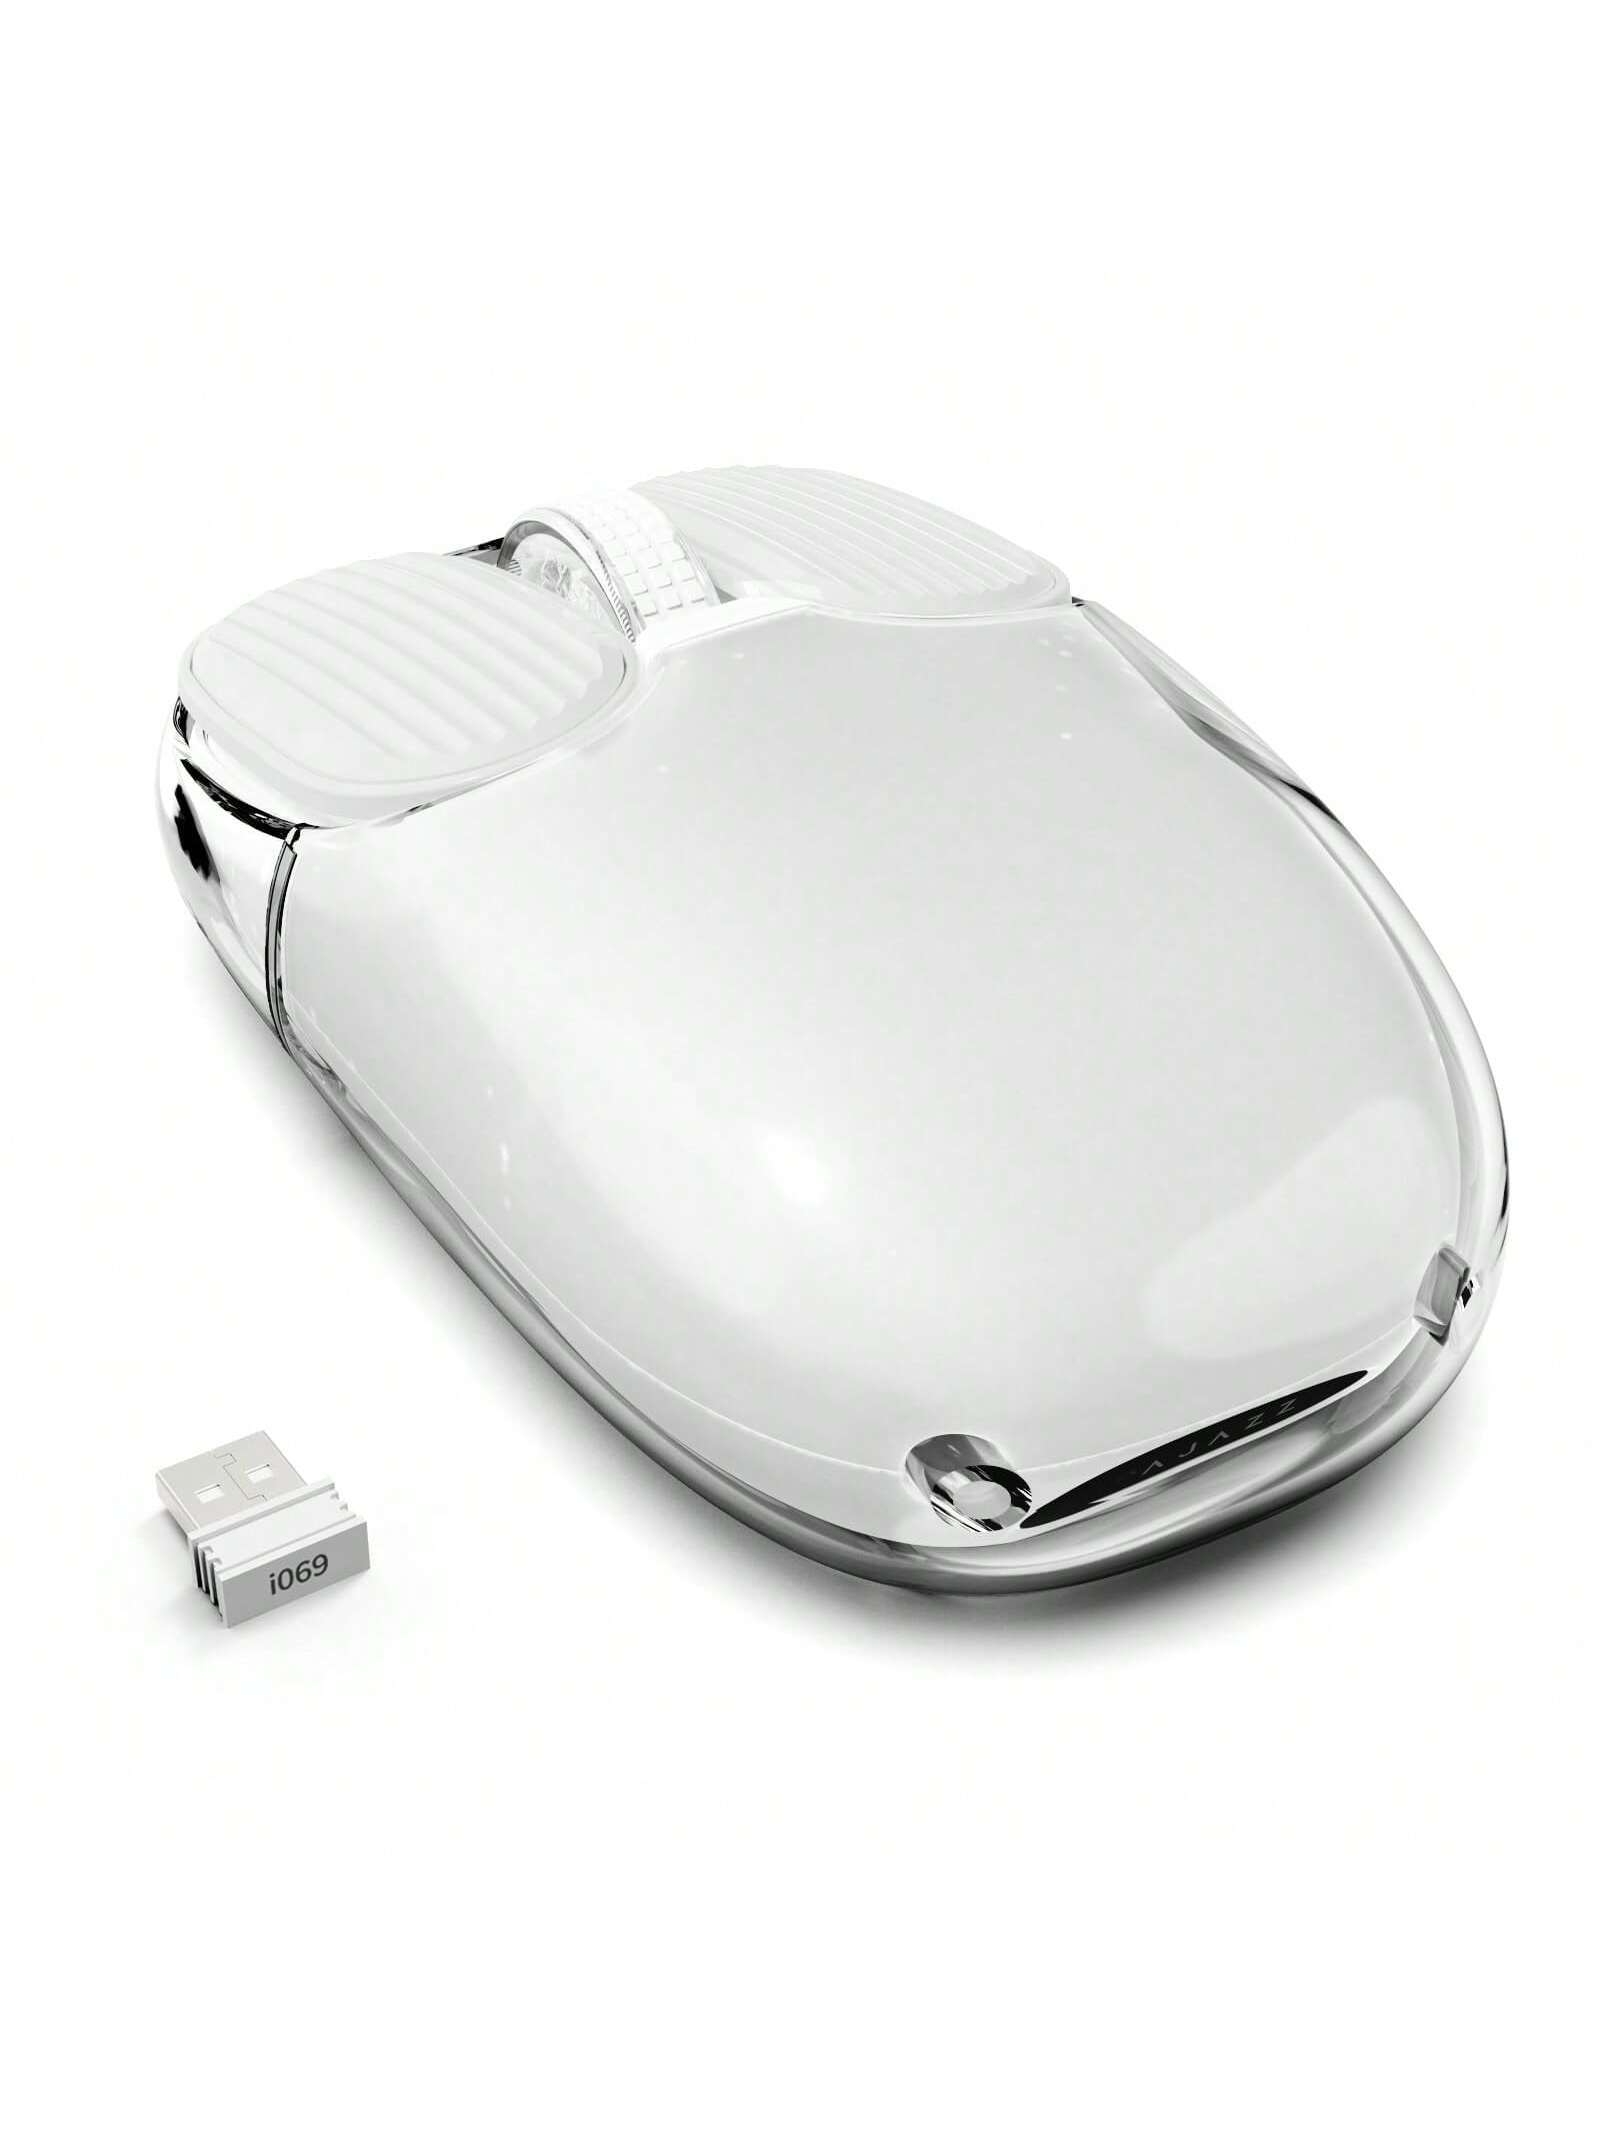 MAMBASNAKE Wireless Mouse, 2.4GHz with USB Mini Receiver